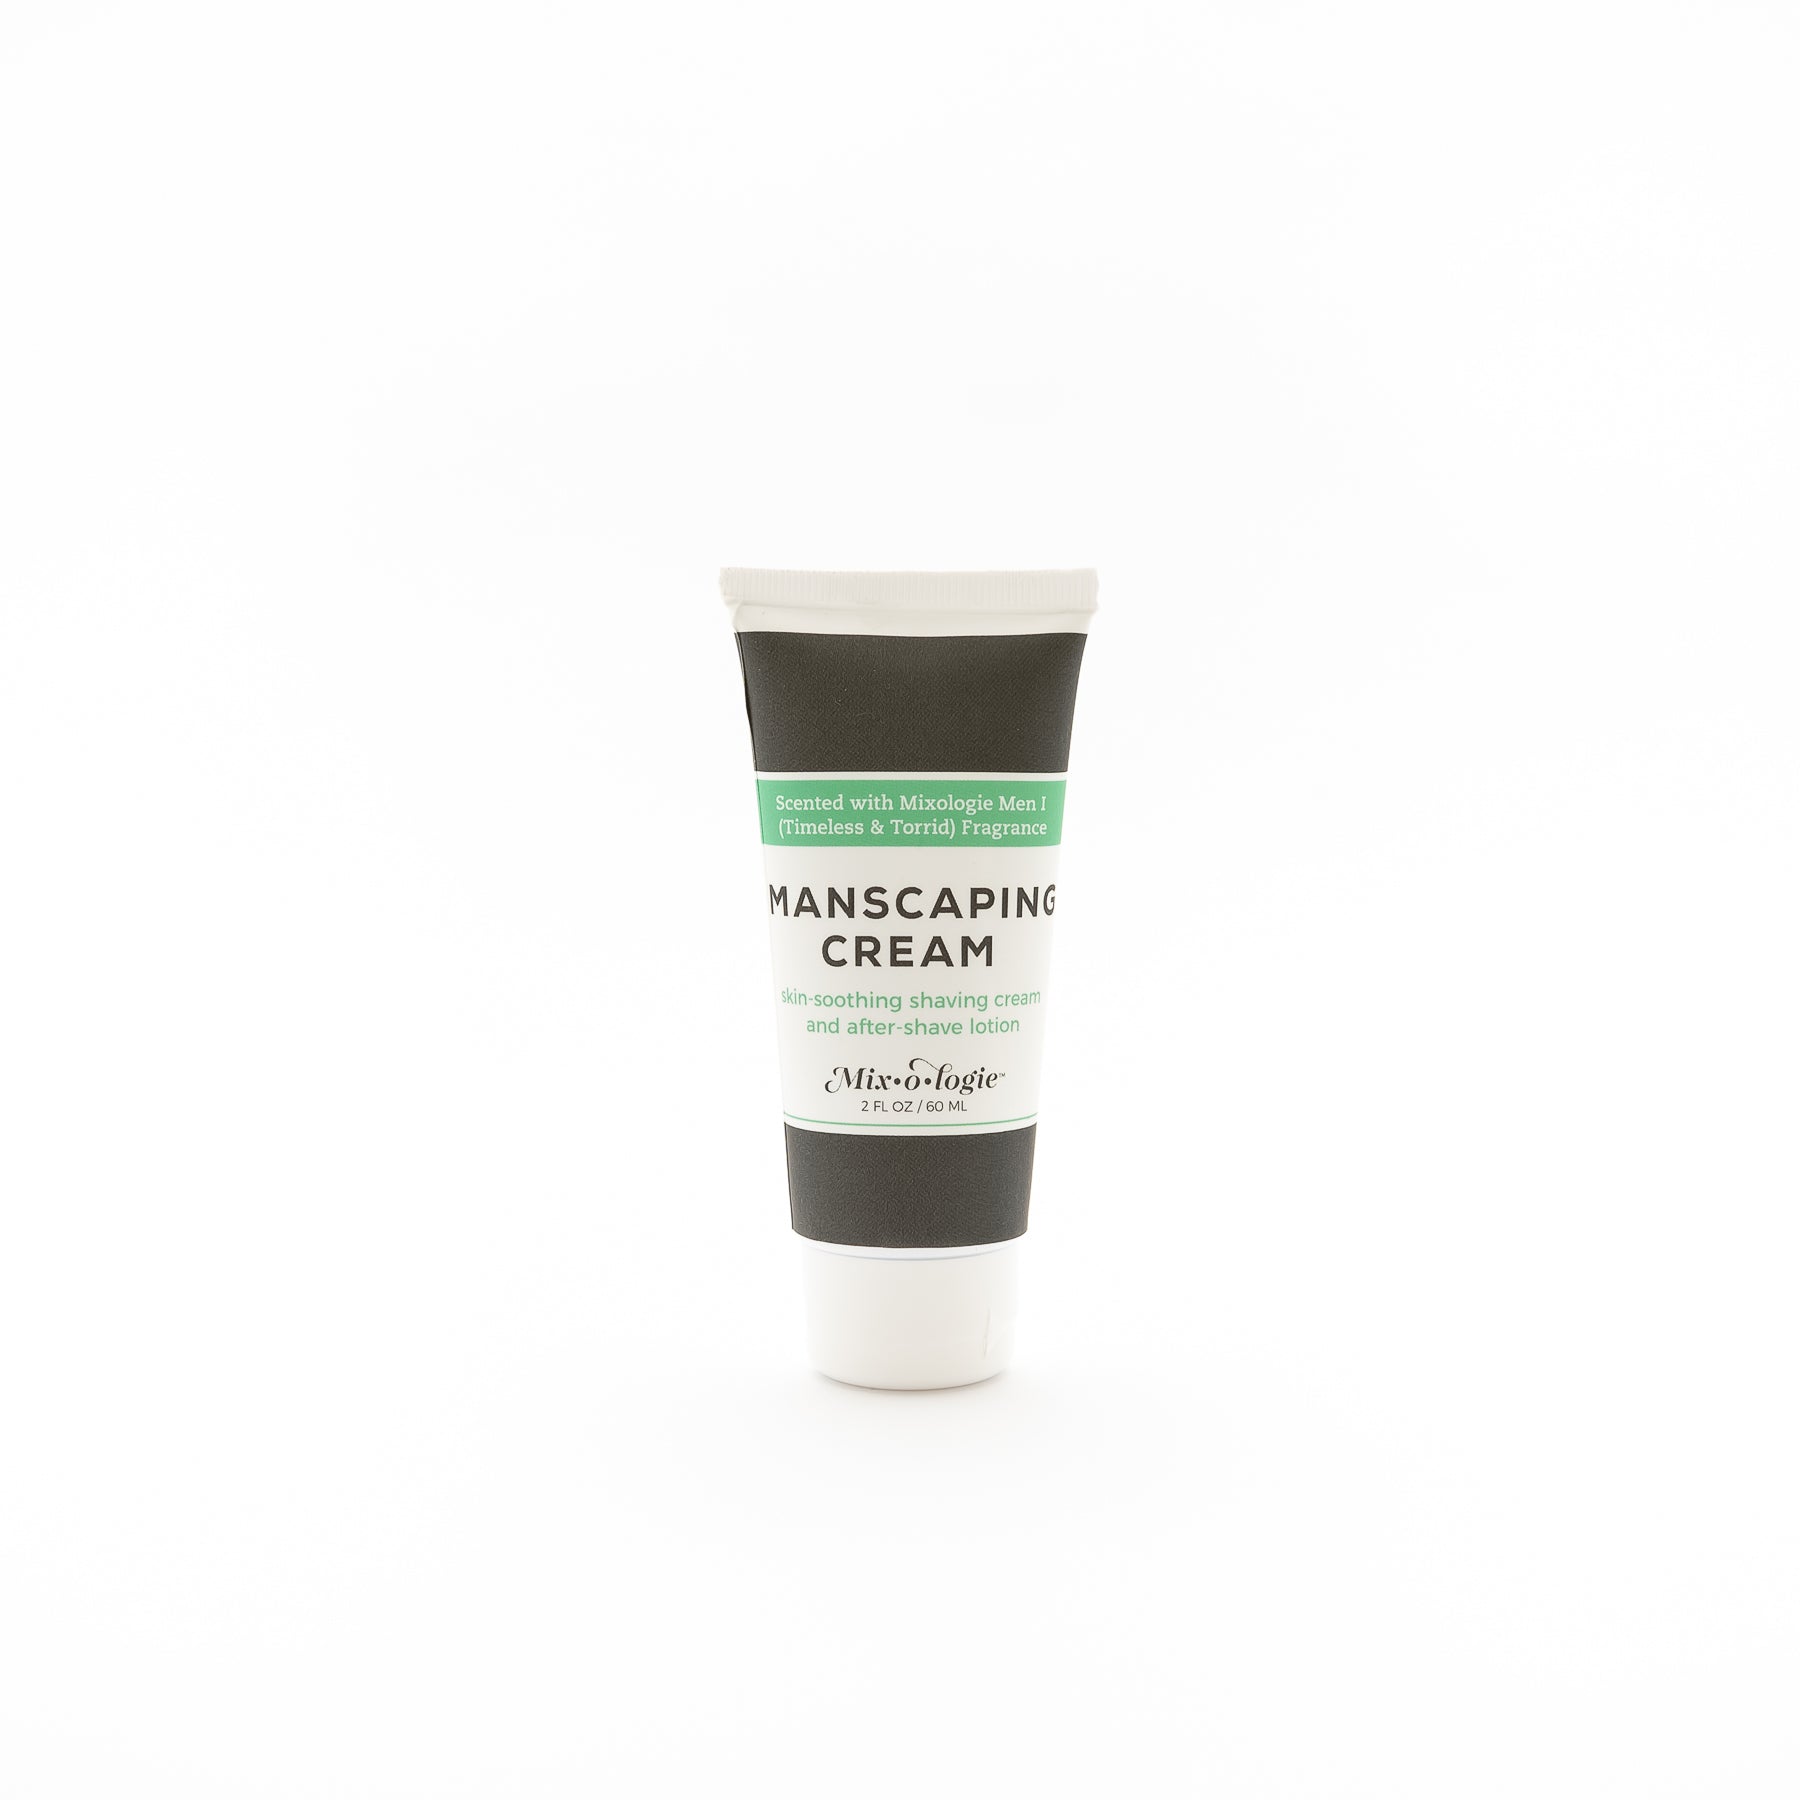 Manscaping cream - Skin smoothing shaving cream and after shave lotion scented with Mixologie's Men's I (timeless and torrid) fragrance in 60 mL plastic tube.